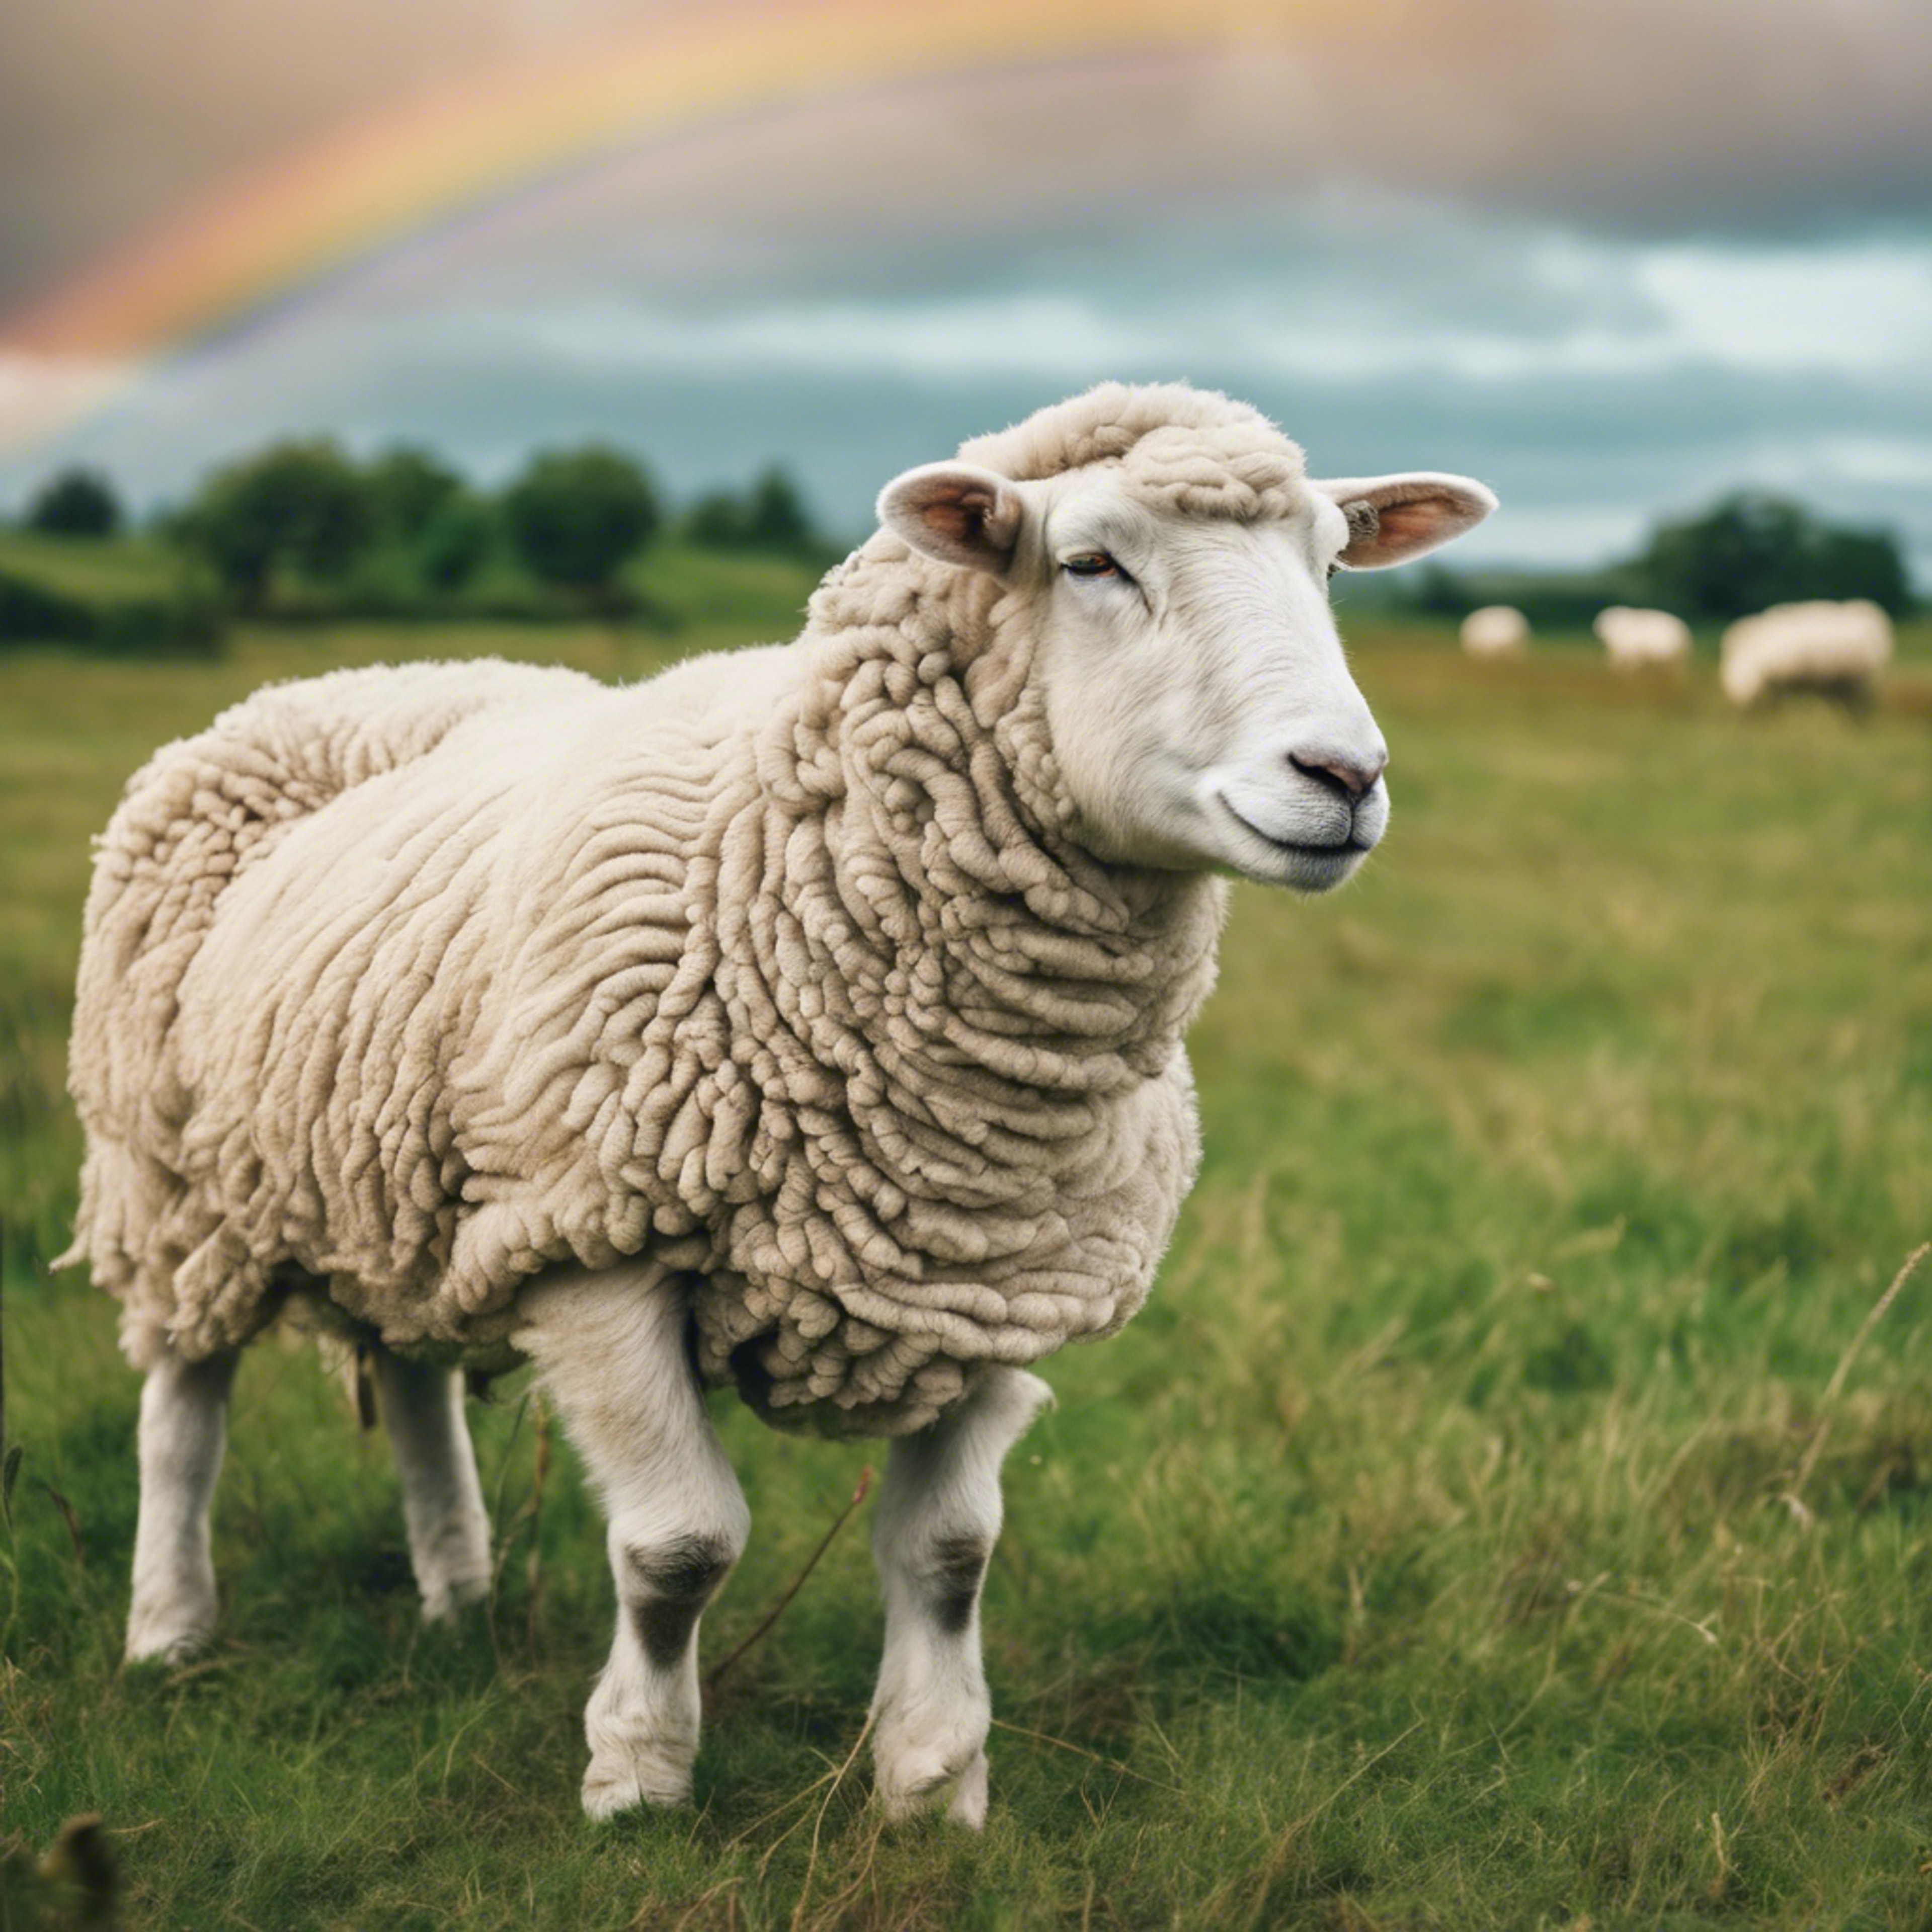 A beautiful open field of grass with puffy white cloud sheep that create rainbow trails as they bound joyfully around.壁紙[bc005b864b354d3896db]